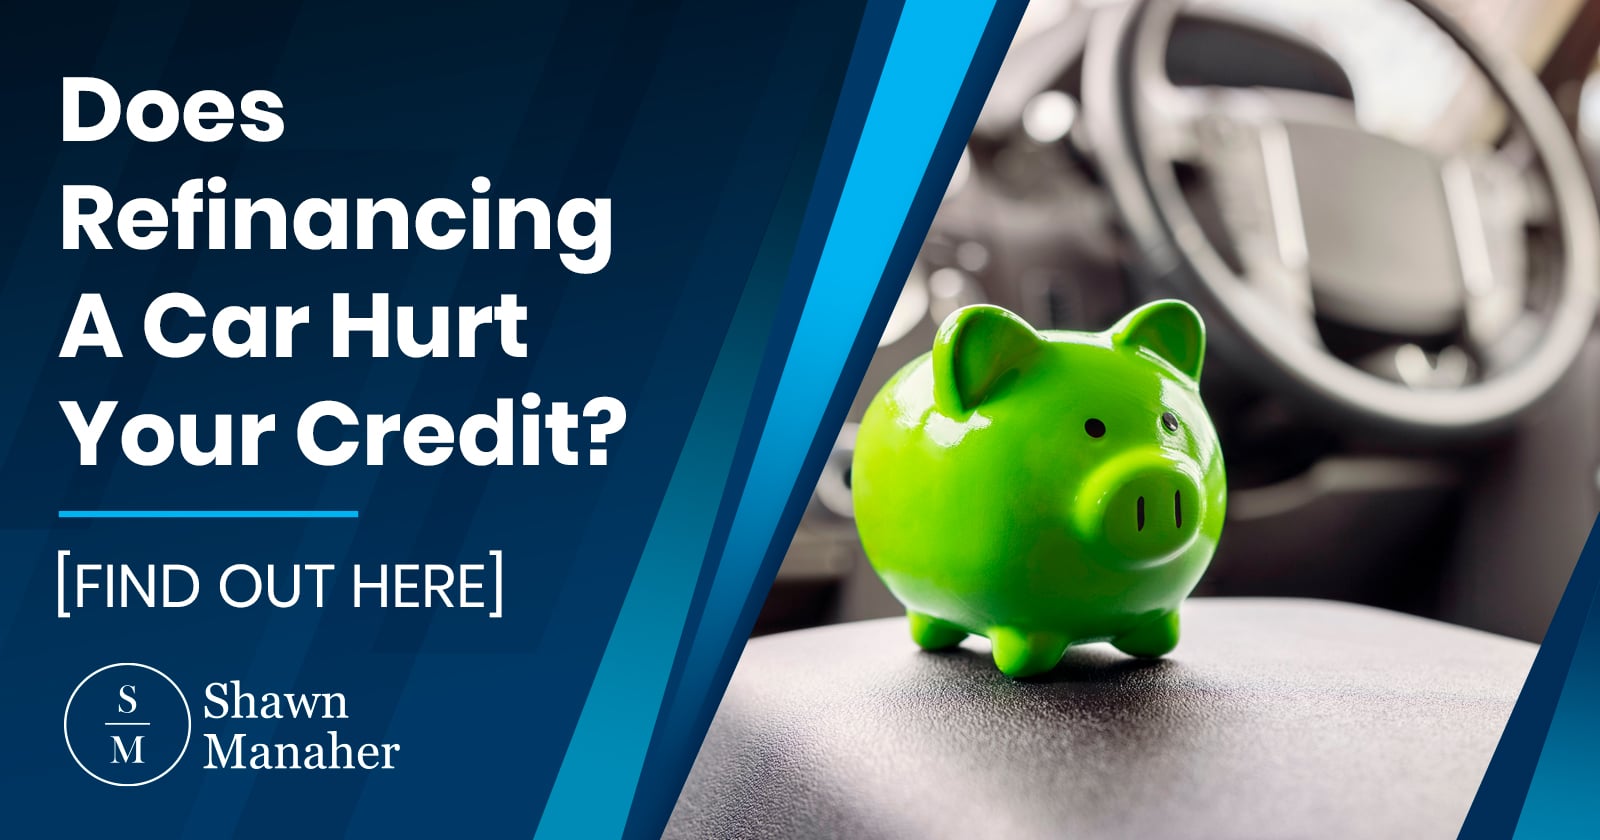 Does Refinancing A Car Hurt Your Credit? [Find Out Here]